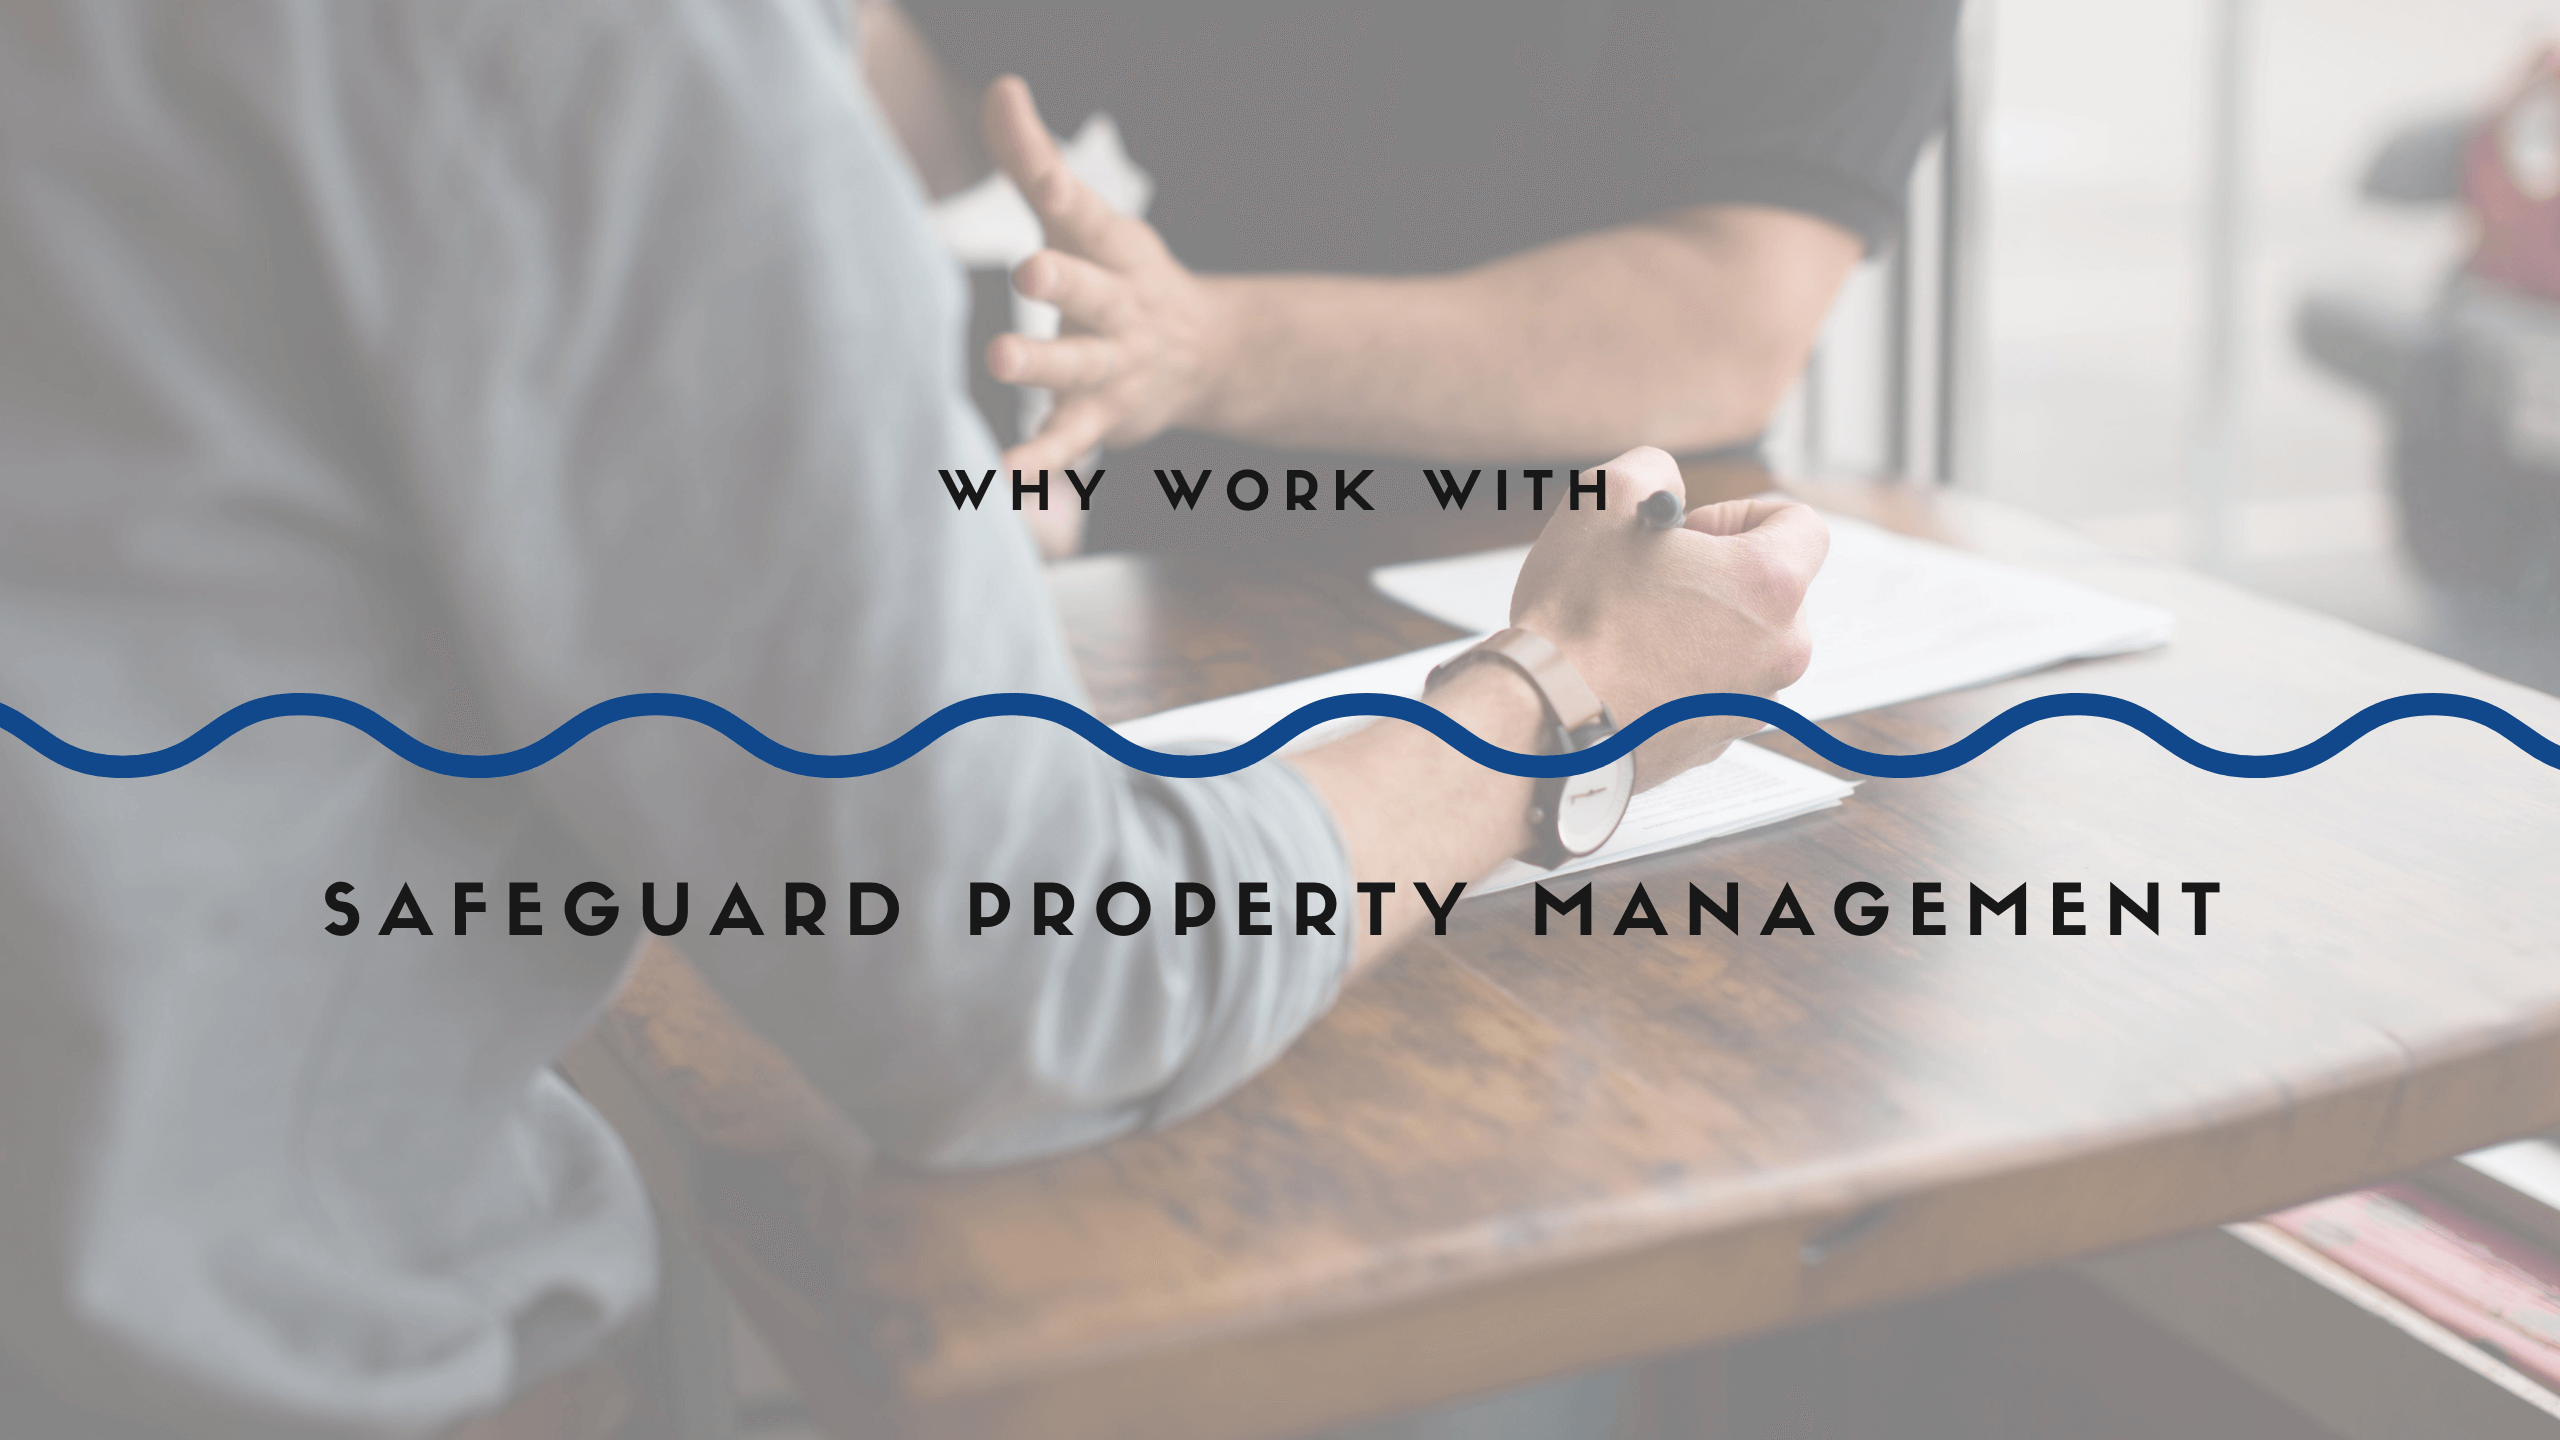 Work with Safeguard, the Pioneer of Sandy Property Management